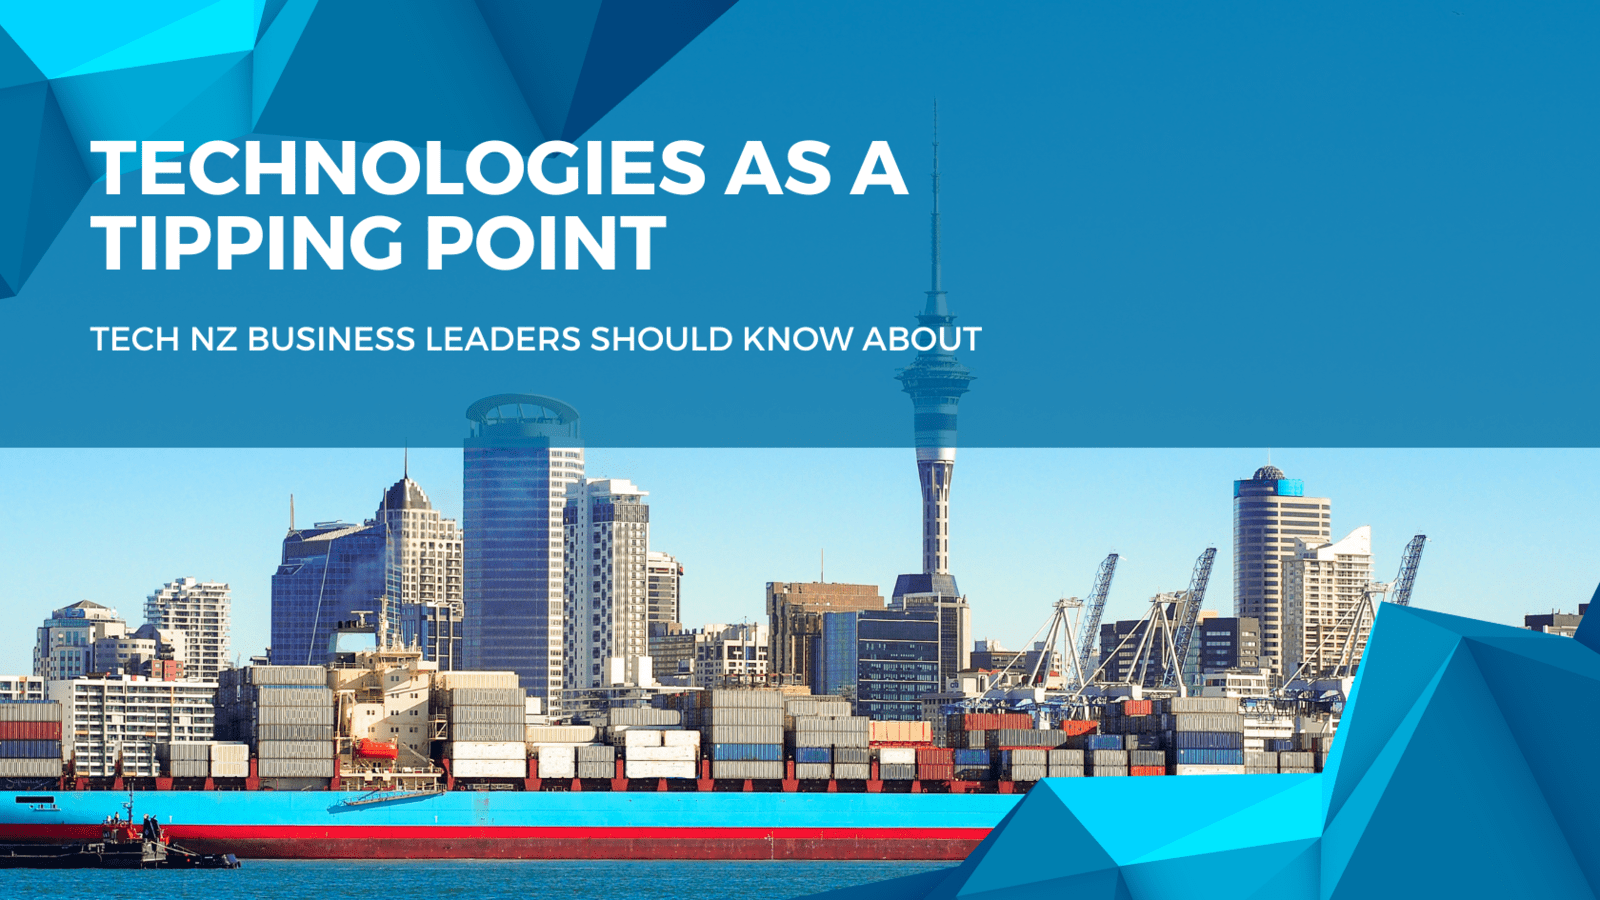 Technologies as a tipping point: tech NZ business leaders and boards should know about